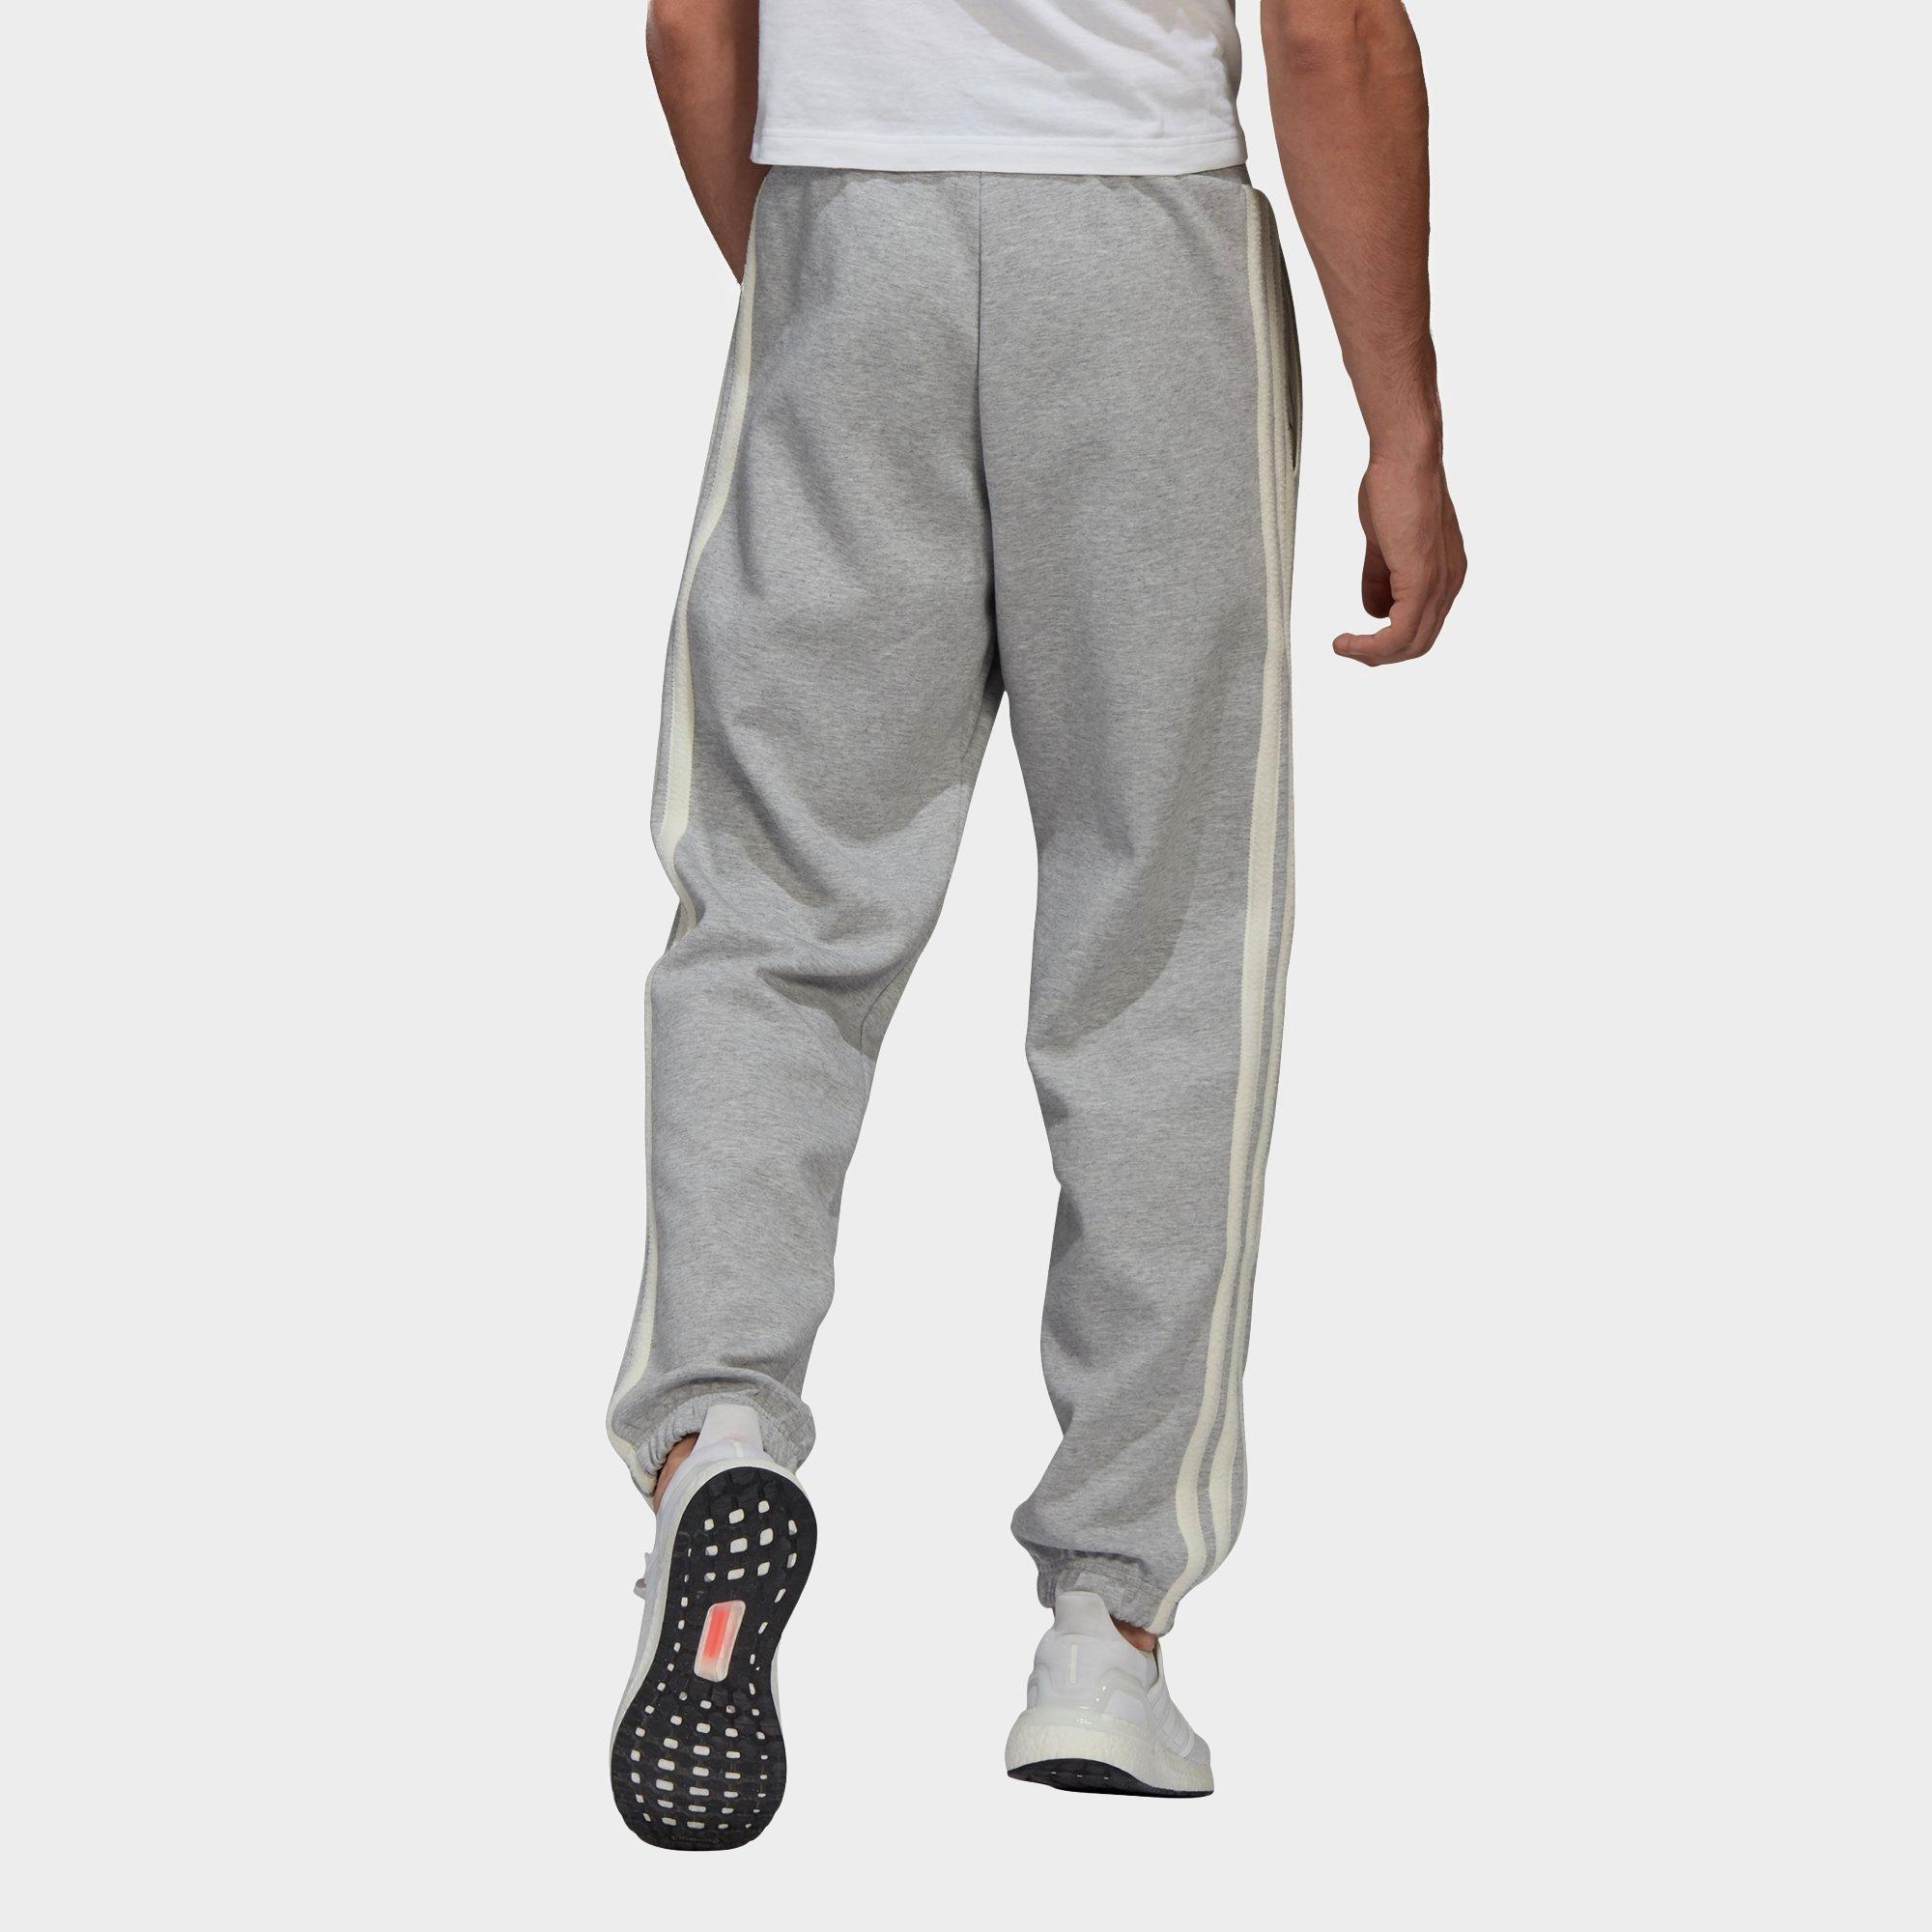 adidas winter trousers